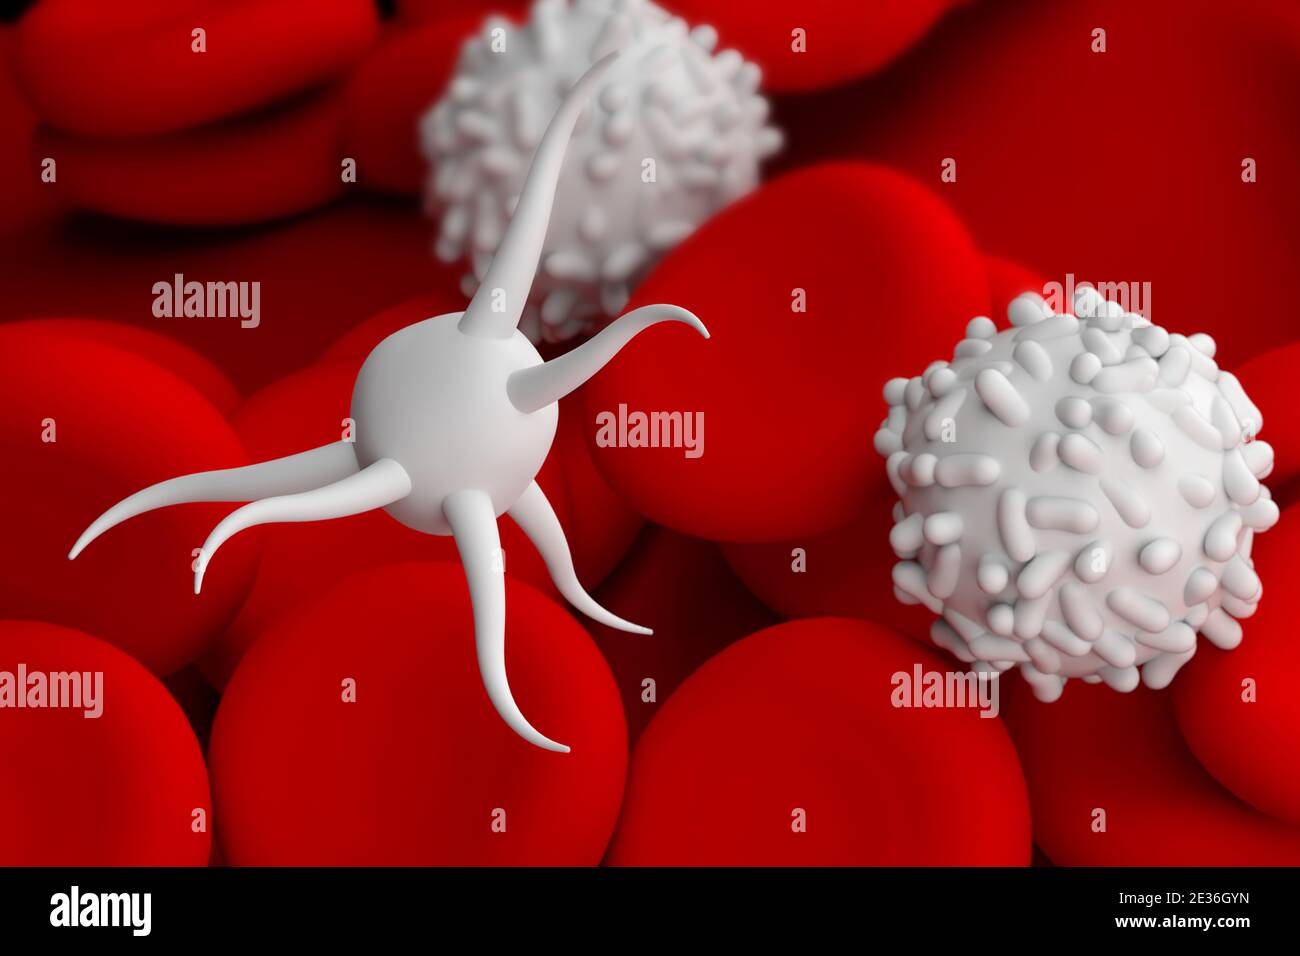 platelet thrombocyte with red and white blood cells 3d illustration close-up Stock Photo